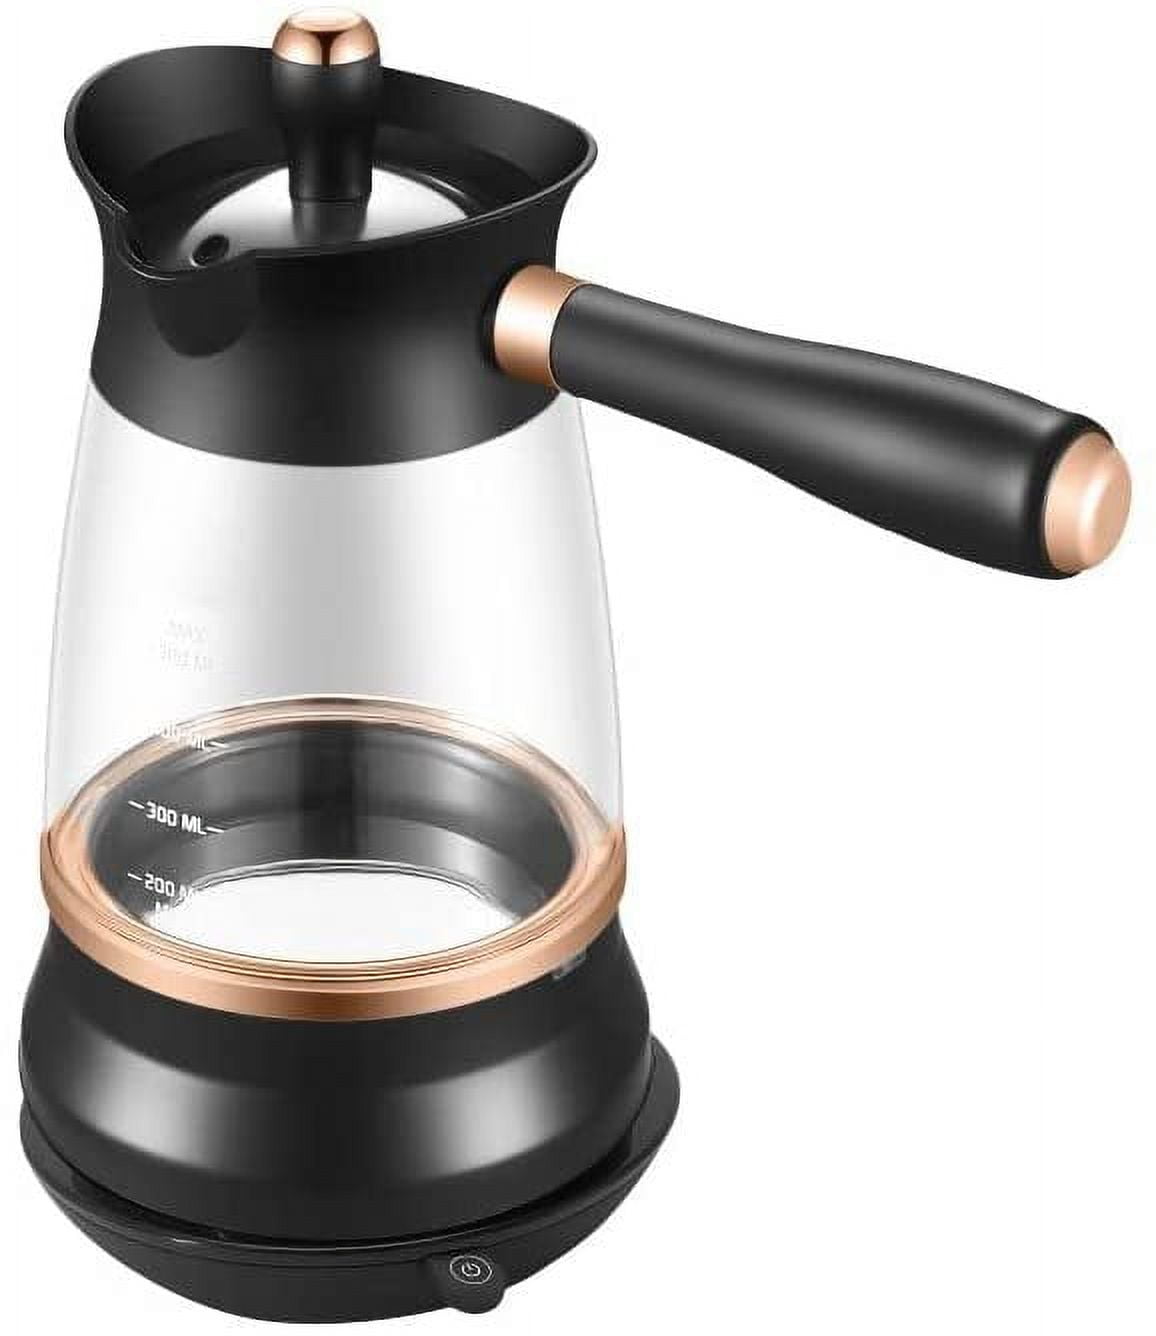  Brentwood Appliances TS-117S Electric Turkish Coffee Maker:  Home & Kitchen